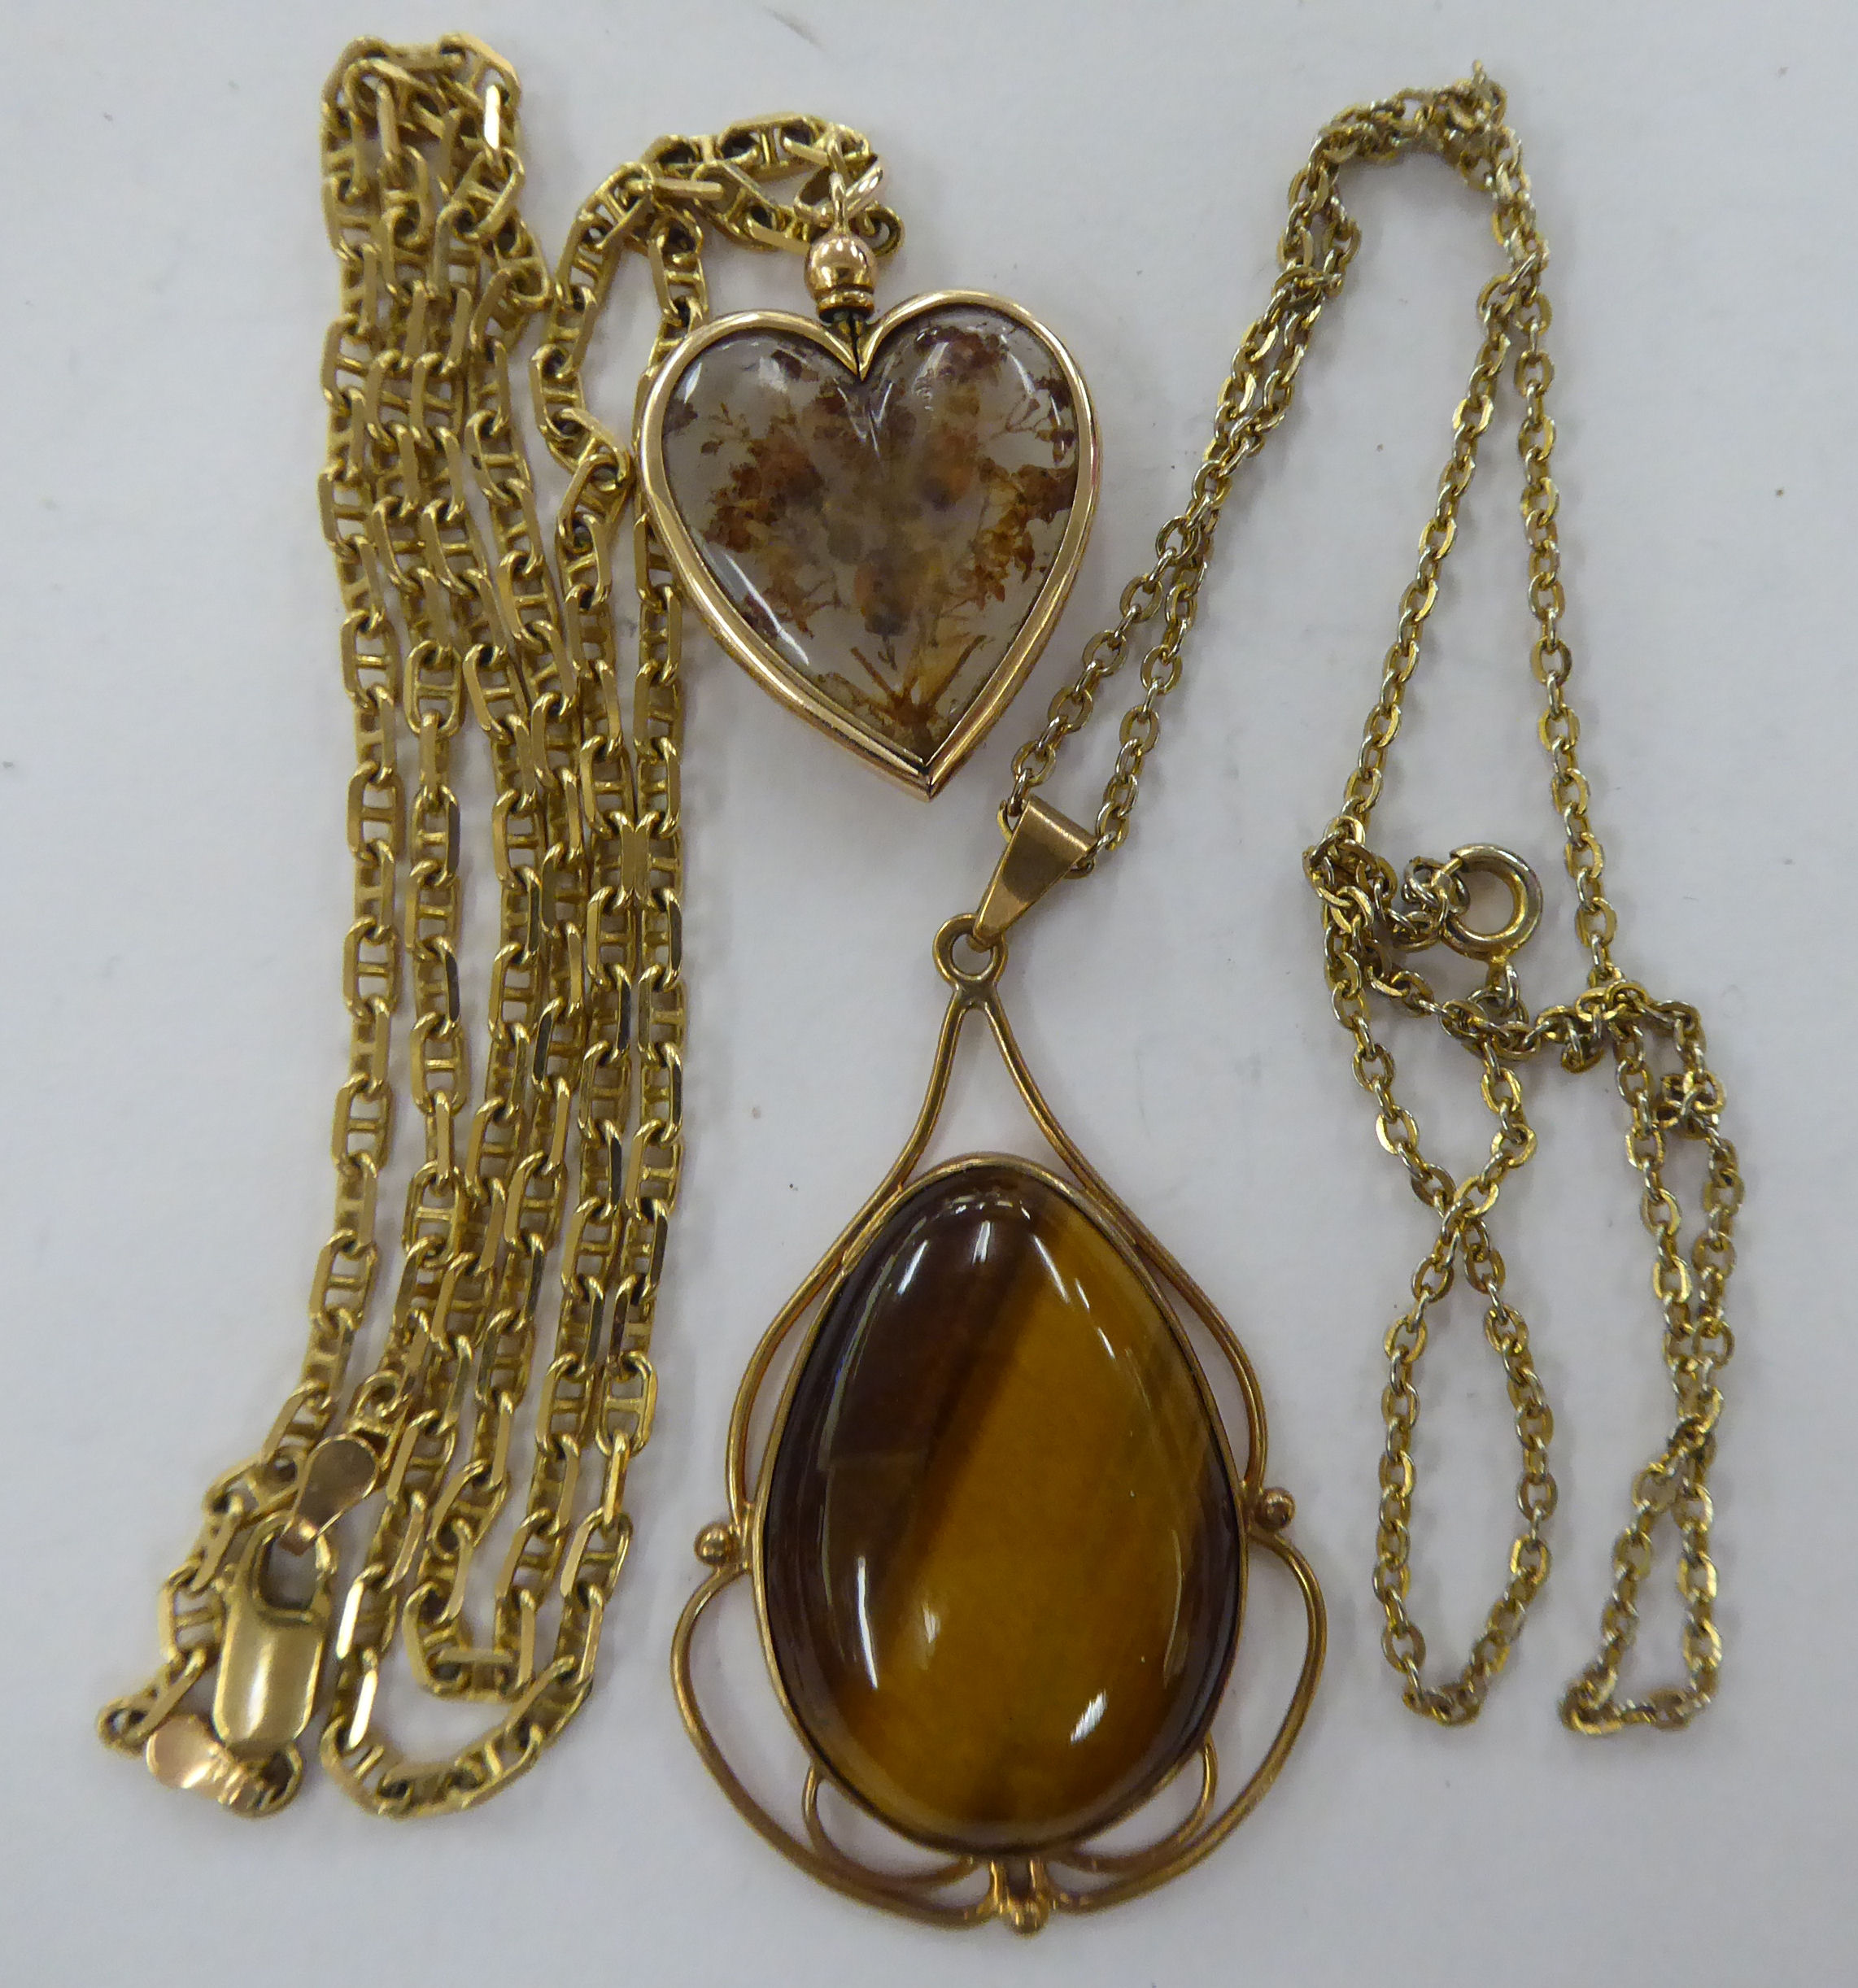 A 9ct gold belcher link neckchain, on a ring-bolt clasp, suspending a tiger's eye pendant,